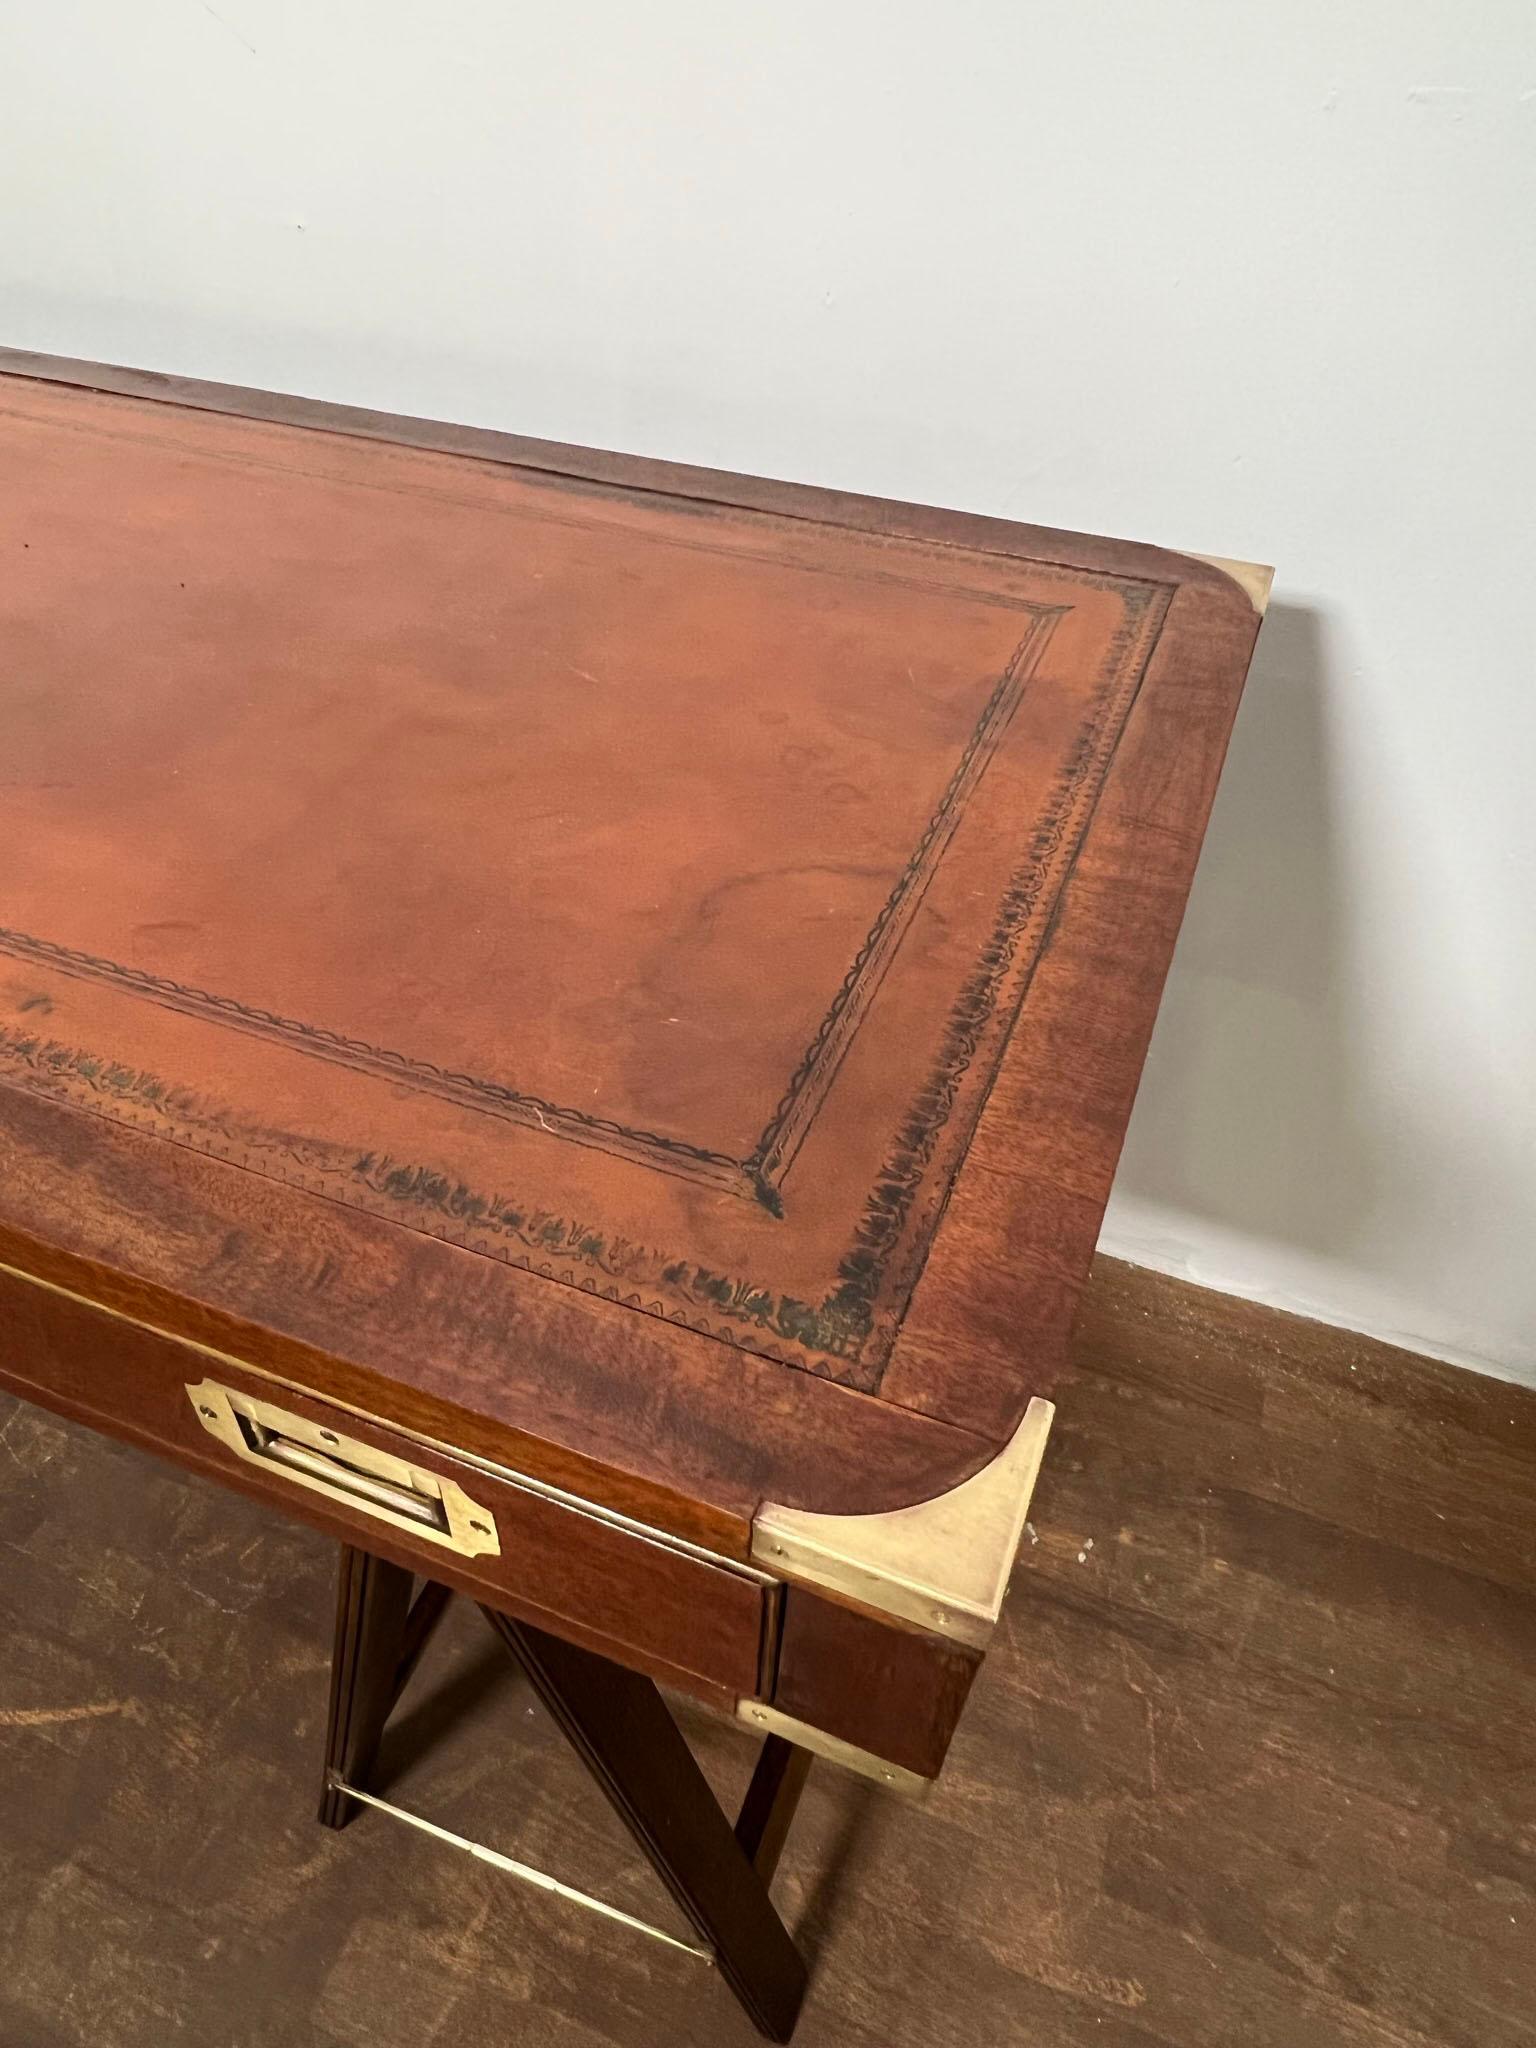 Mid-20th Century English Campaign Desk With Leather Top Circa 1950s